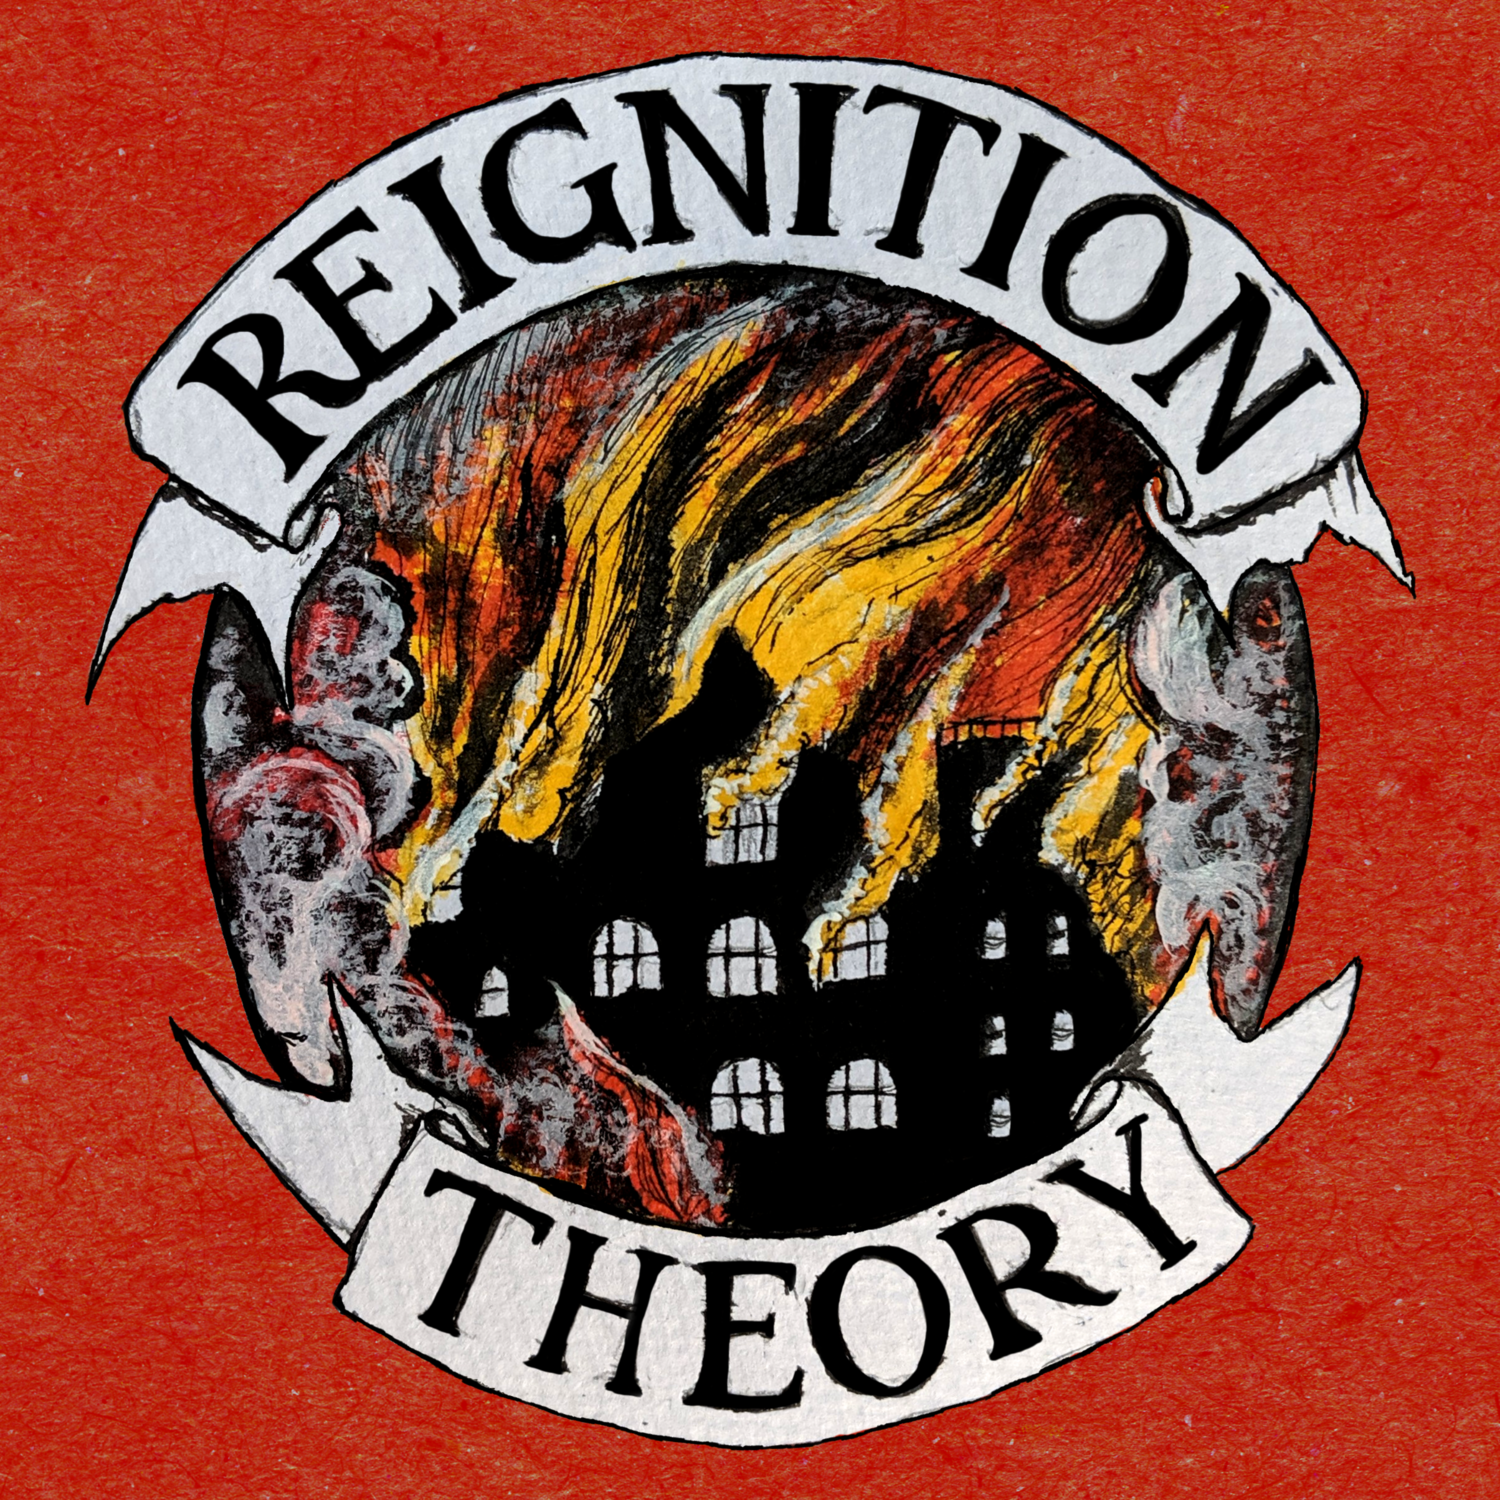 Episode 15 - Aftermath - The Reignition Theory